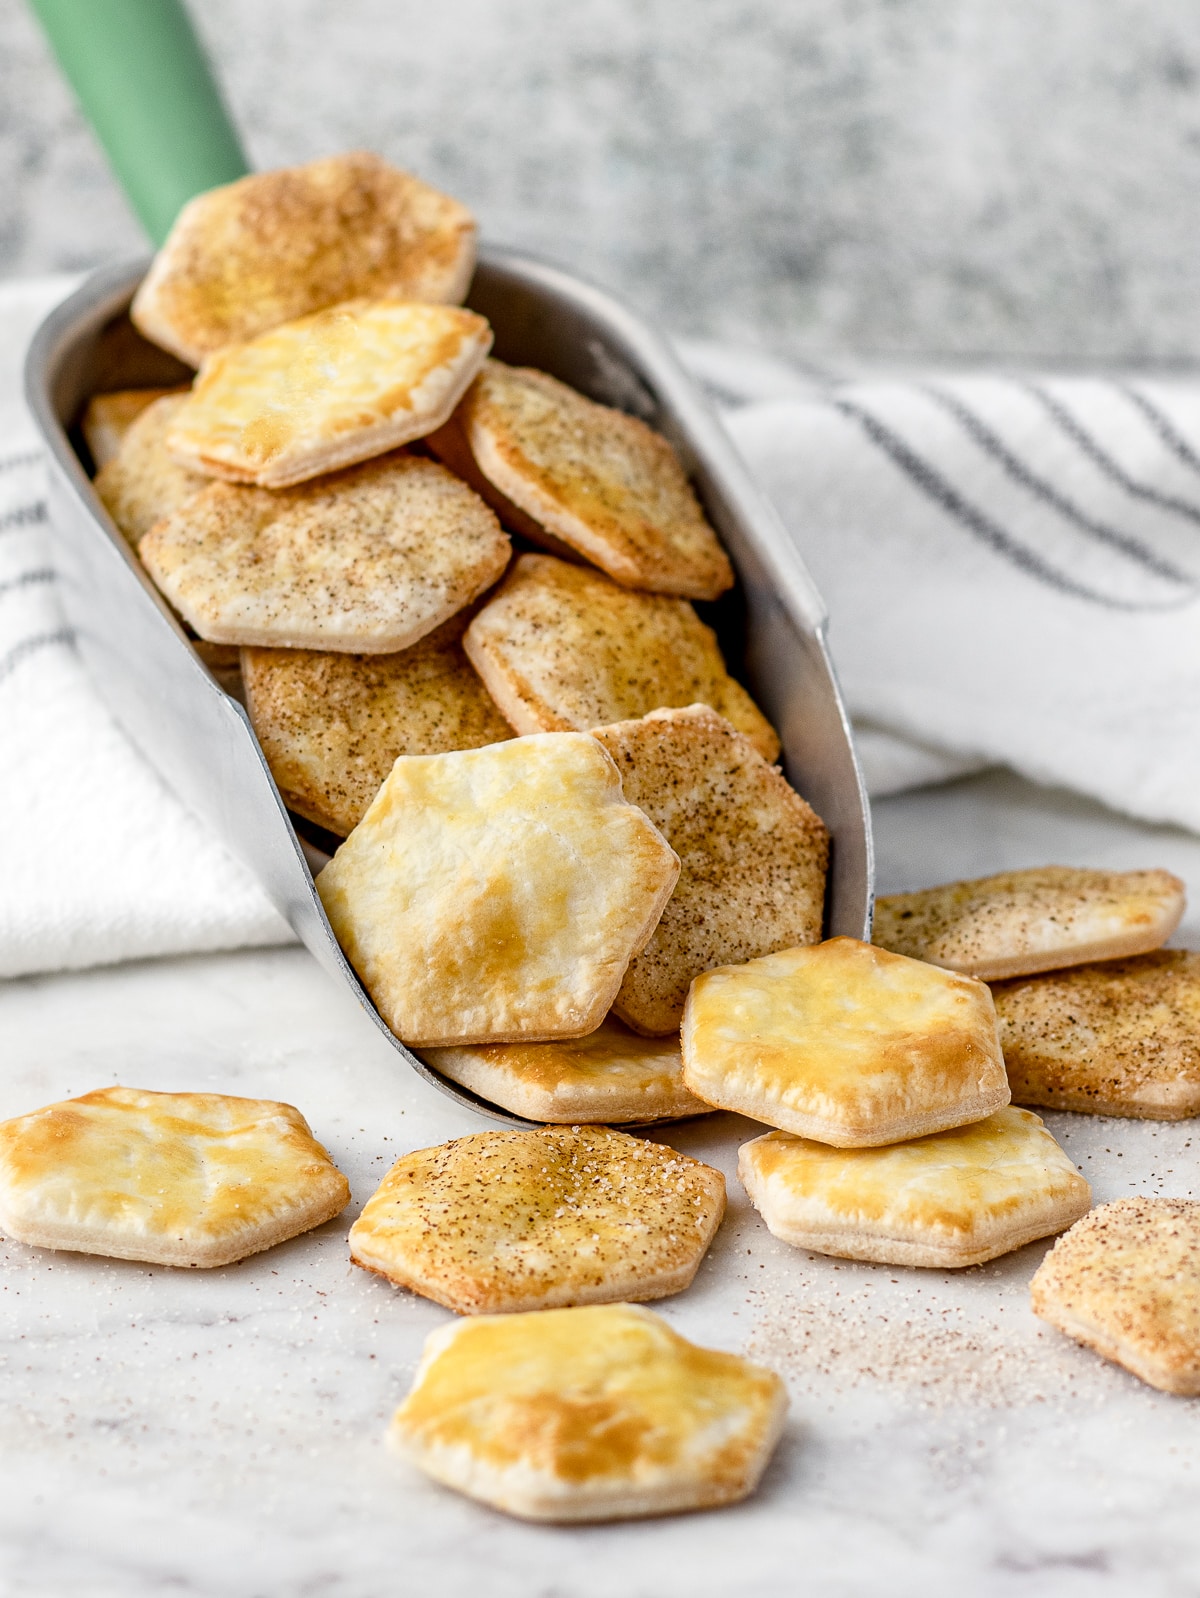 Pie crust cookies falling out of a scoop. A variety of cinnamon sugar and plain chips is pictured.